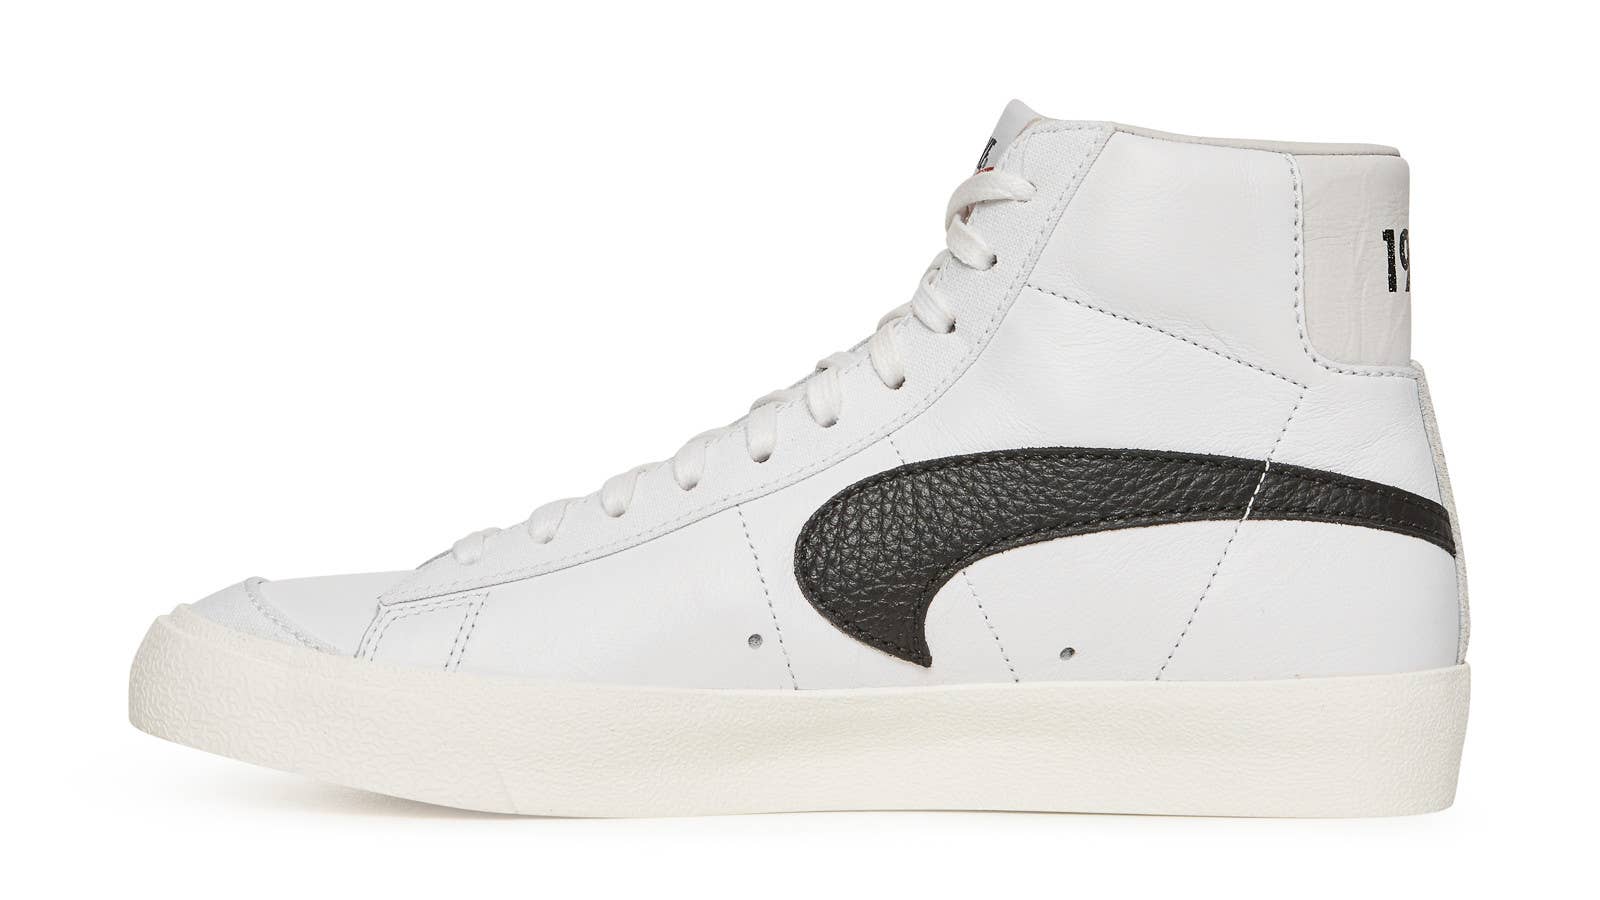 Another Chance at Slam Jam's Nike Blazer |